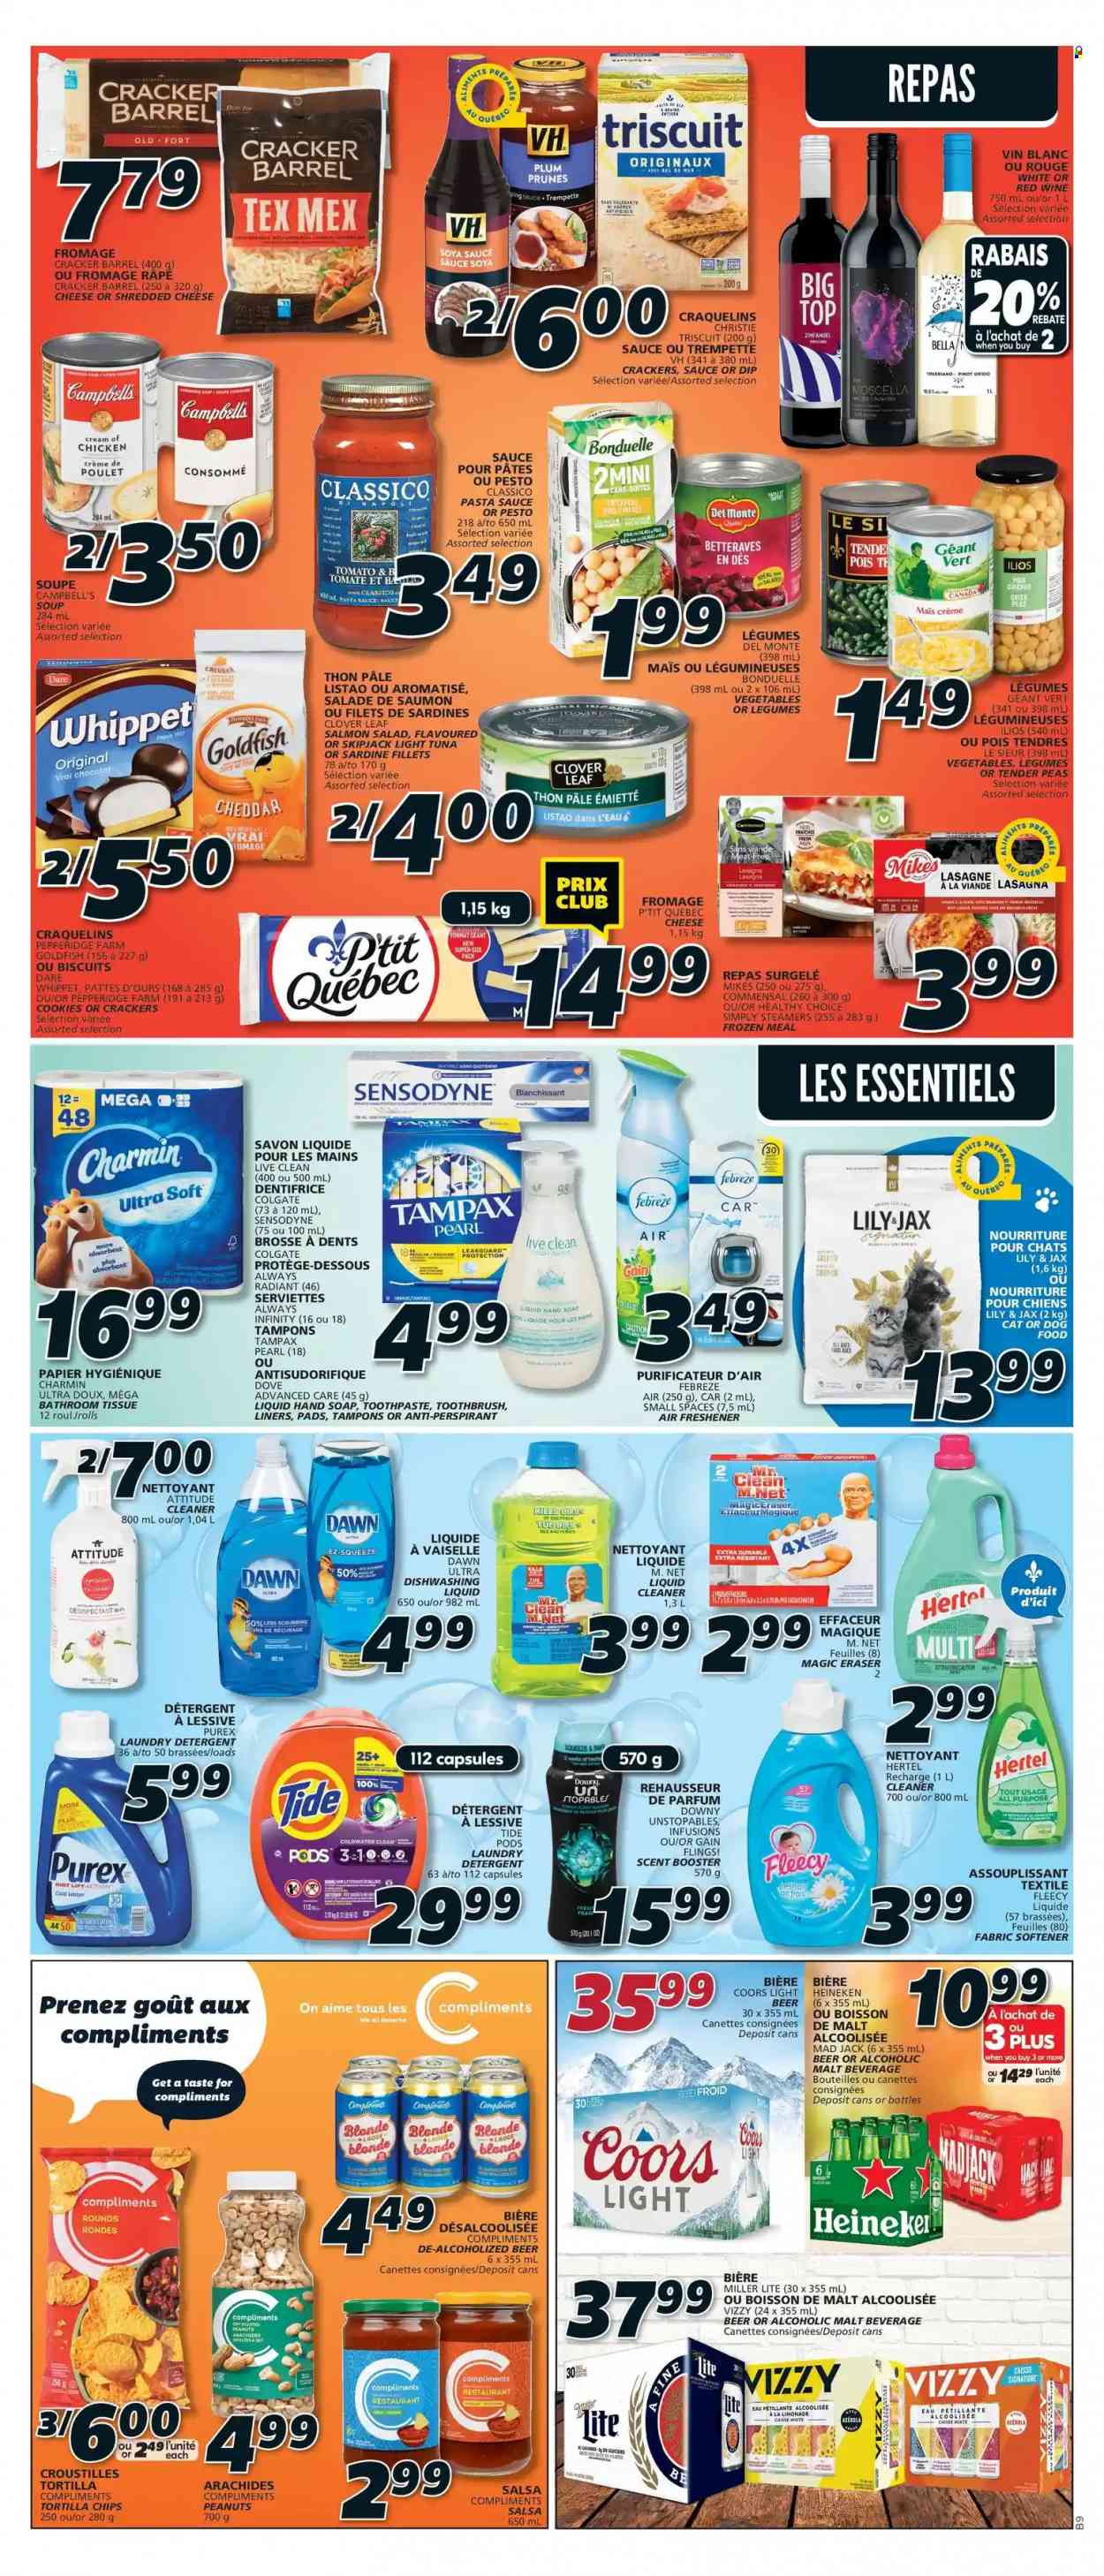 thumbnail - IGA Flyer - May 12, 2022 - May 18, 2022 - Sales products - Bella, peas, sardines, Campbell's, pasta sauce, soup, lasagna meal, Healthy Choice, shredded cheese, Clover, dip, cookies, crackers, biscuit, tortilla chips, Goldfish, malt, light tuna, soy sauce, salsa, Classico, prunes, peanuts, dried fruit, white wine, Pinot Grigio, beer, Heineken, Dove, Colgate, Miller Lite, Tampax, pesto, Sensodyne, Coors. Page 8.